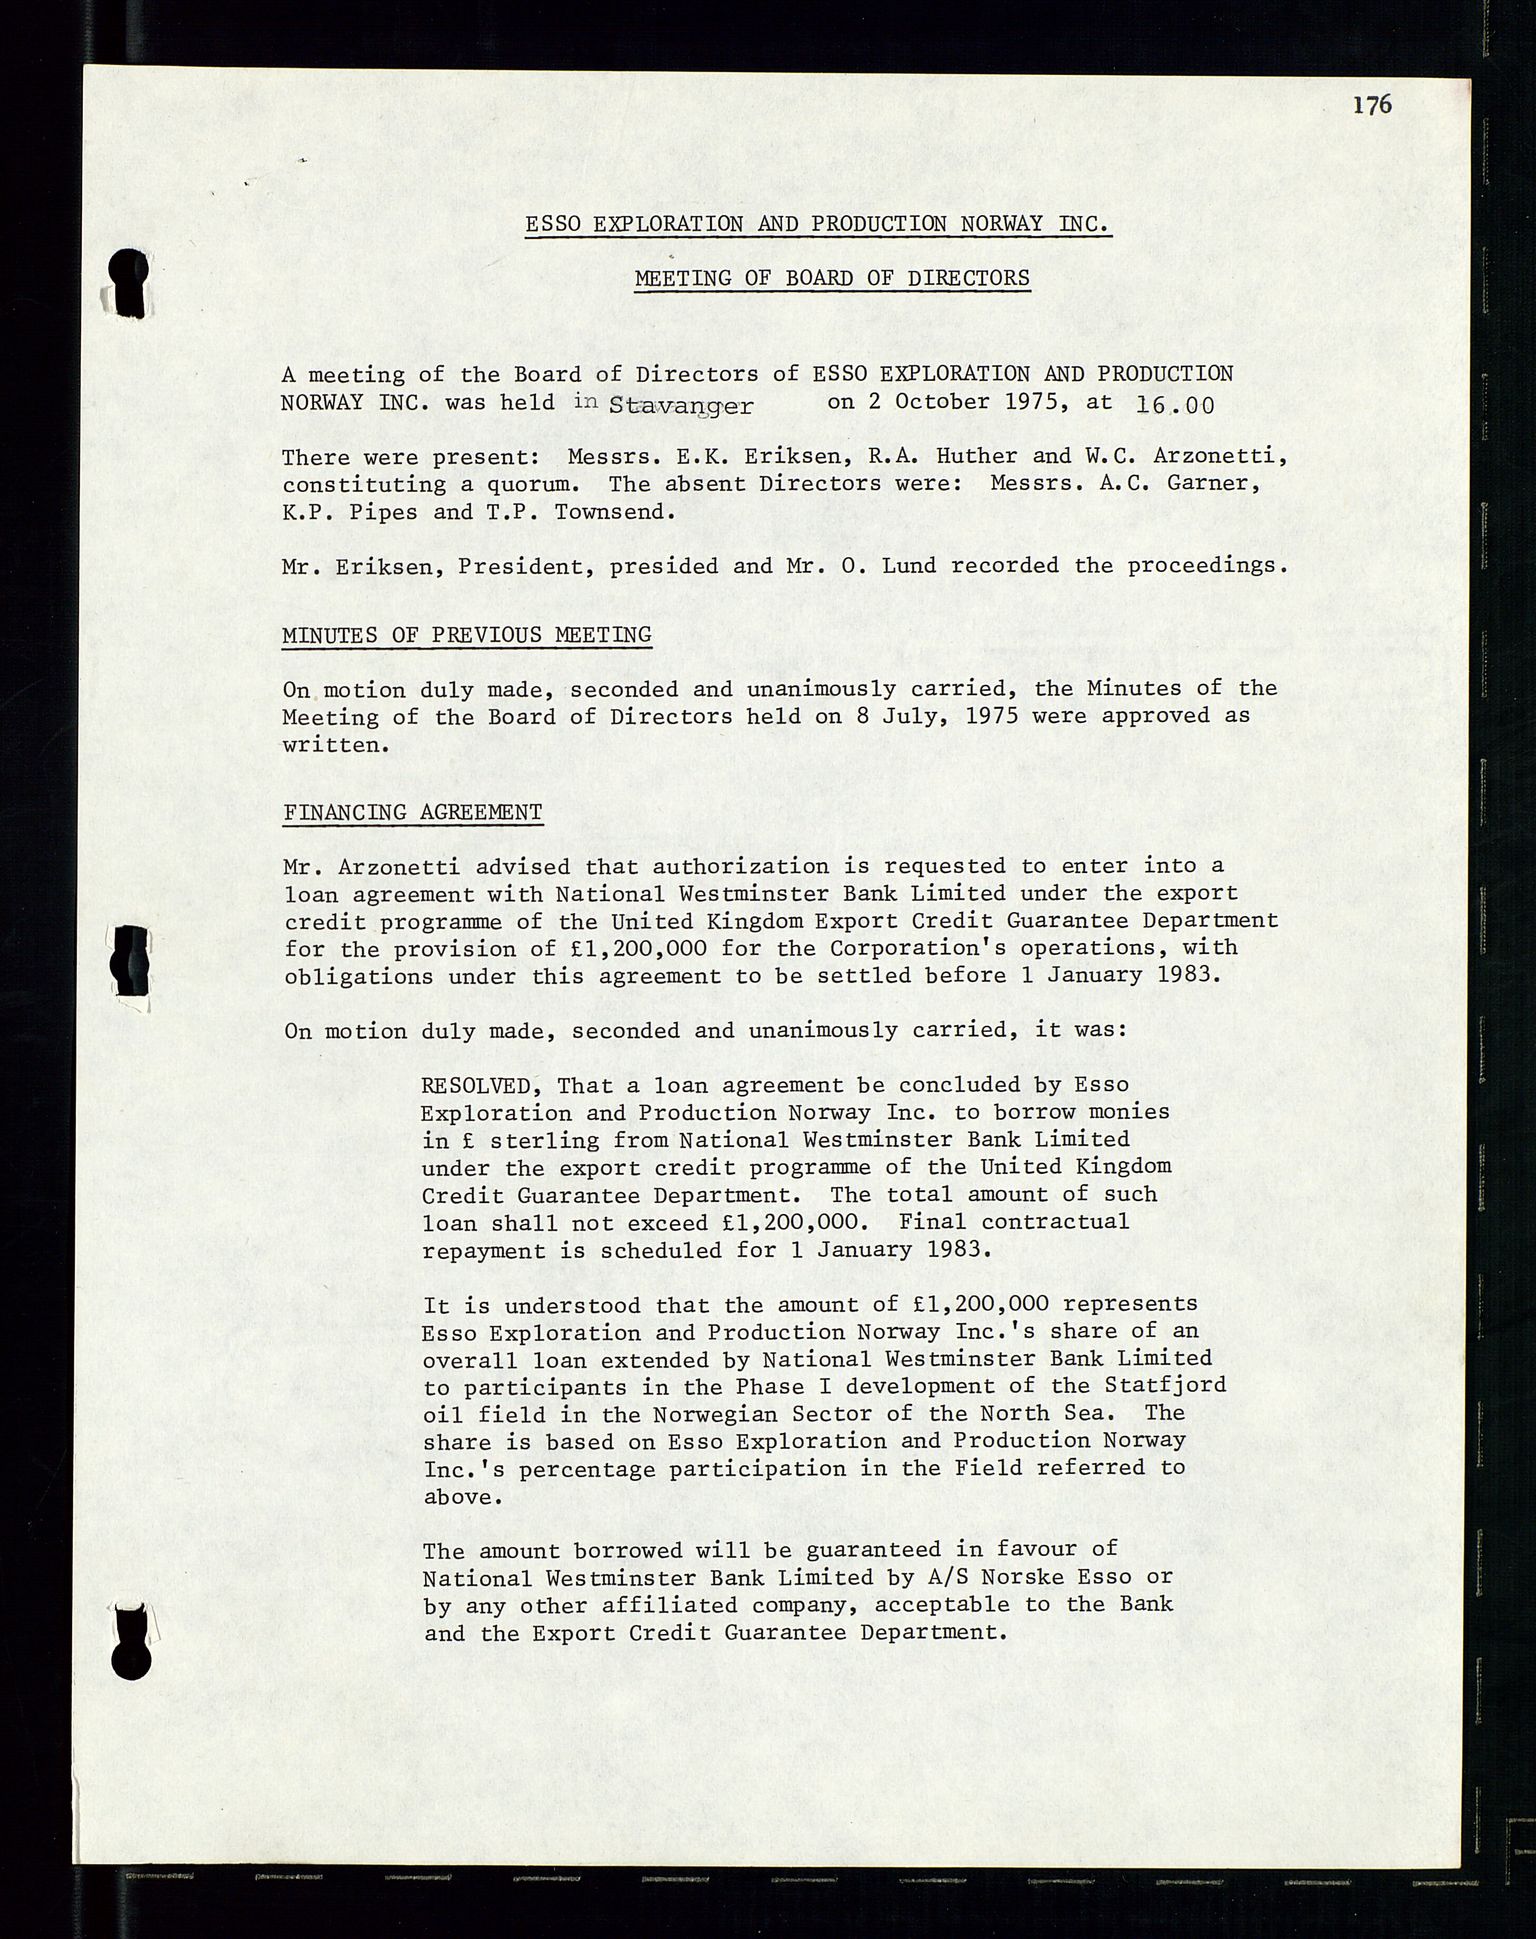 Pa 1512 - Esso Exploration and Production Norway Inc., SAST/A-101917/A/Aa/L0001/0002: Styredokumenter / Corporate records, Board meeting minutes, Agreements, Stocholder meetings, 1975-1979, p. 7